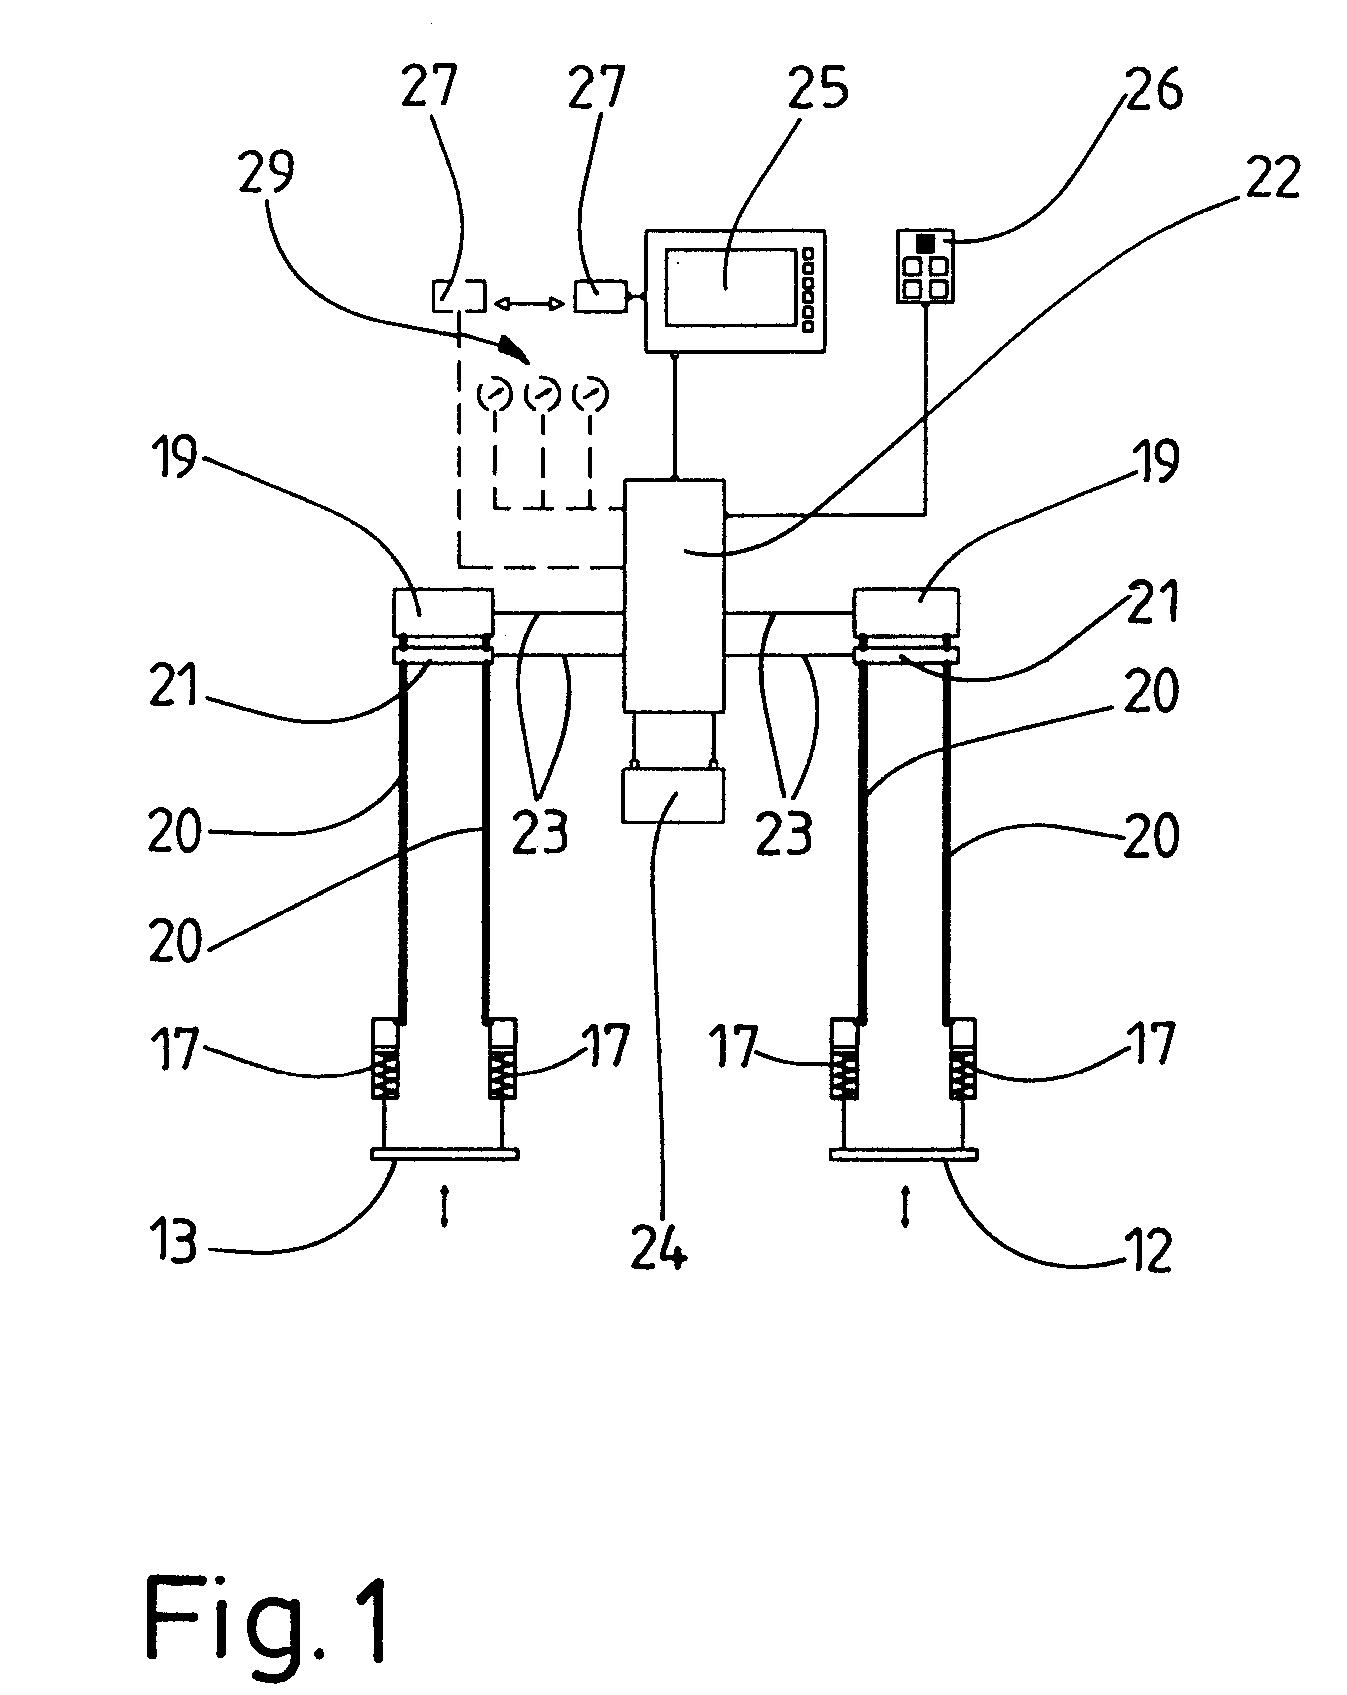 Device and method for controlling trimming flaps on a watercraft, as well as a watercraft having a corresponding device